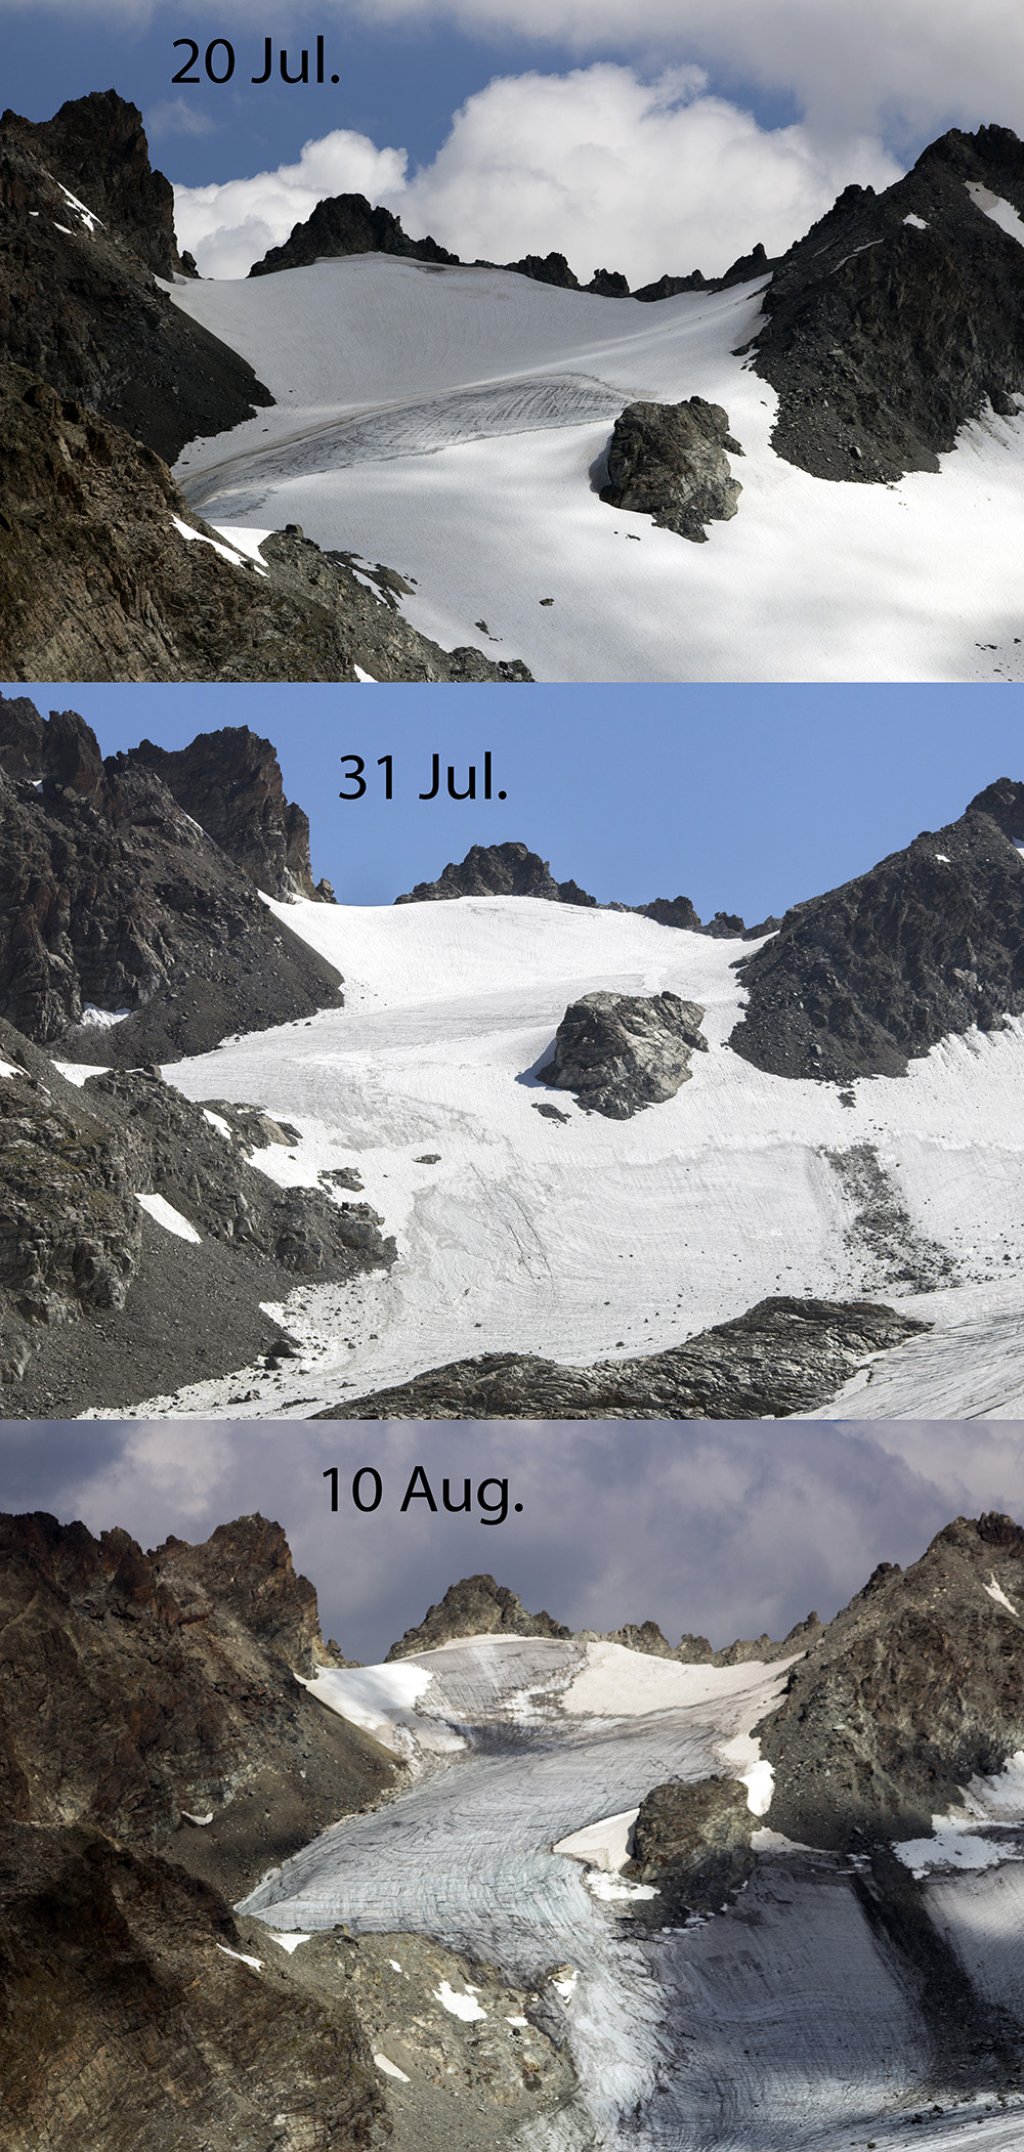 Due to the hot period in July/August, the snow was removed very quickly.